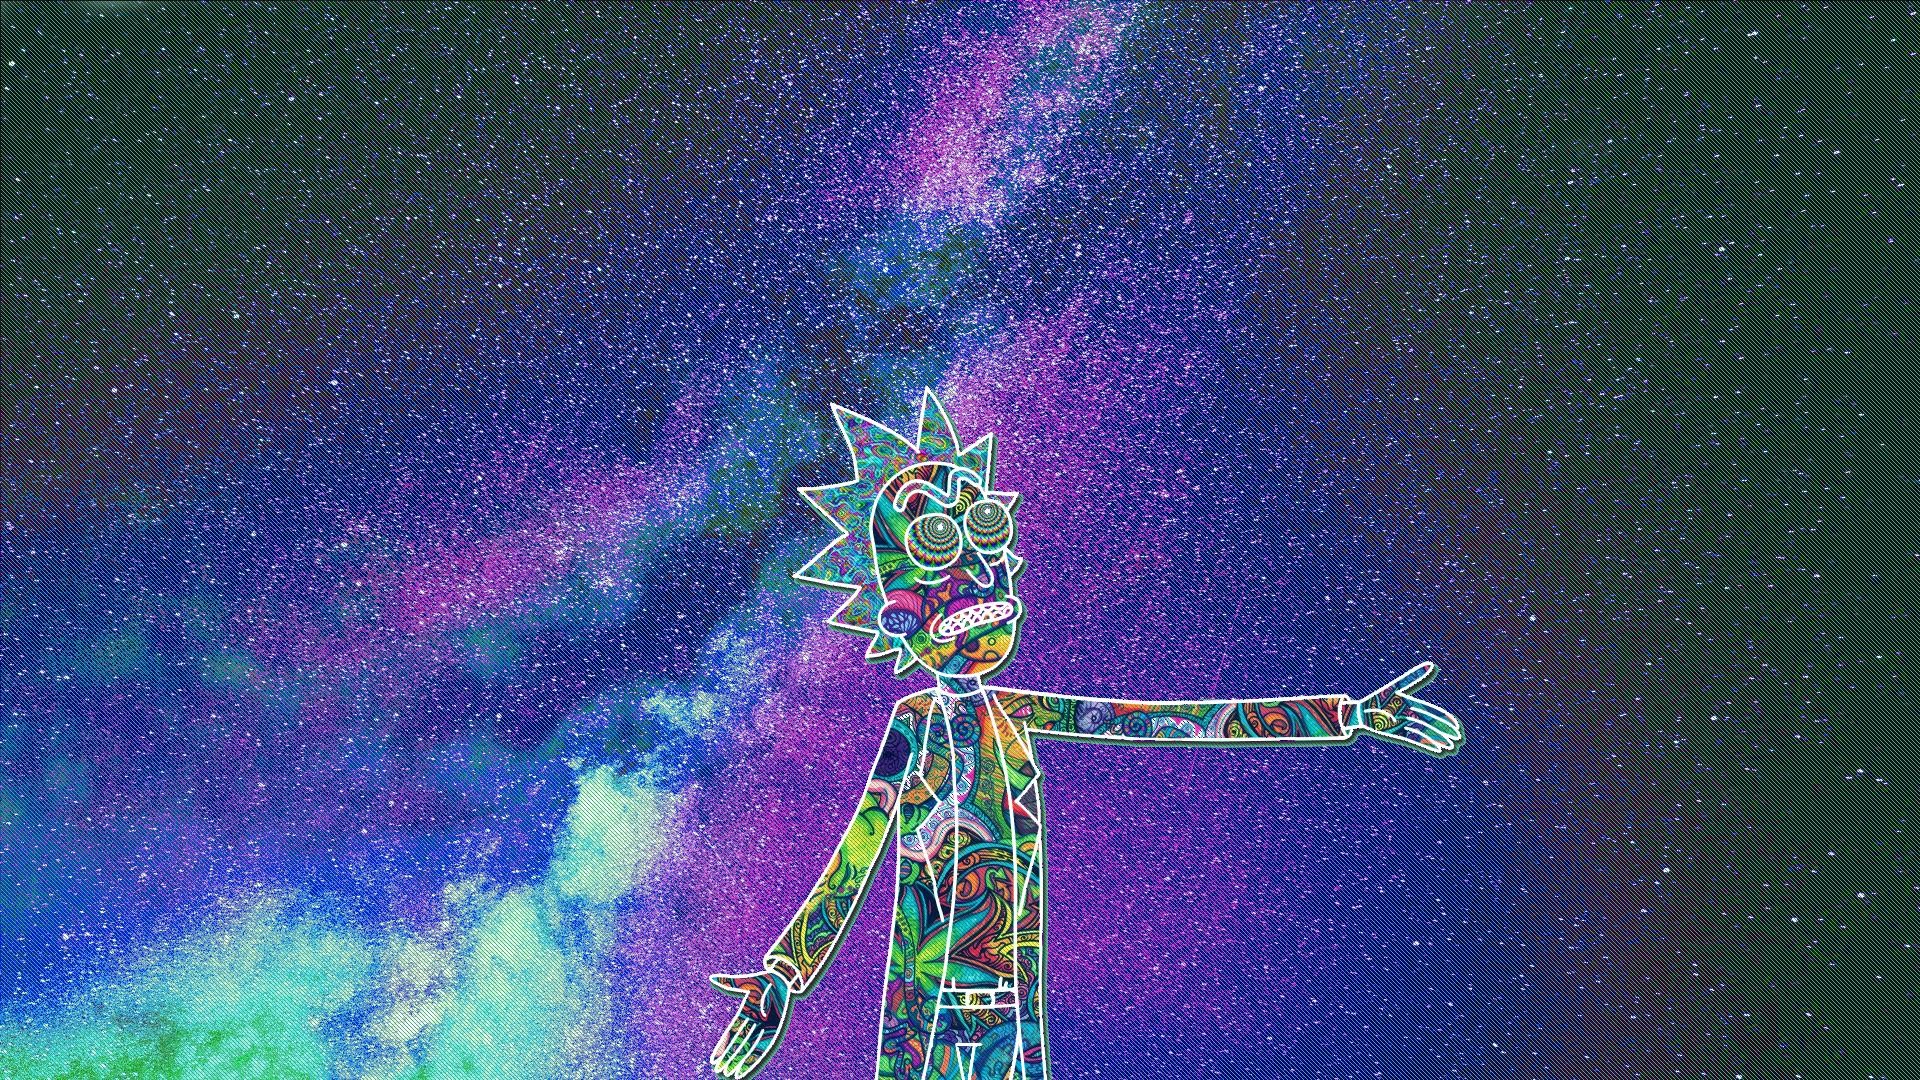 1920x1080 ImageI edited this trippy Rick wallpaper for myself, figured some of you  might like it ...